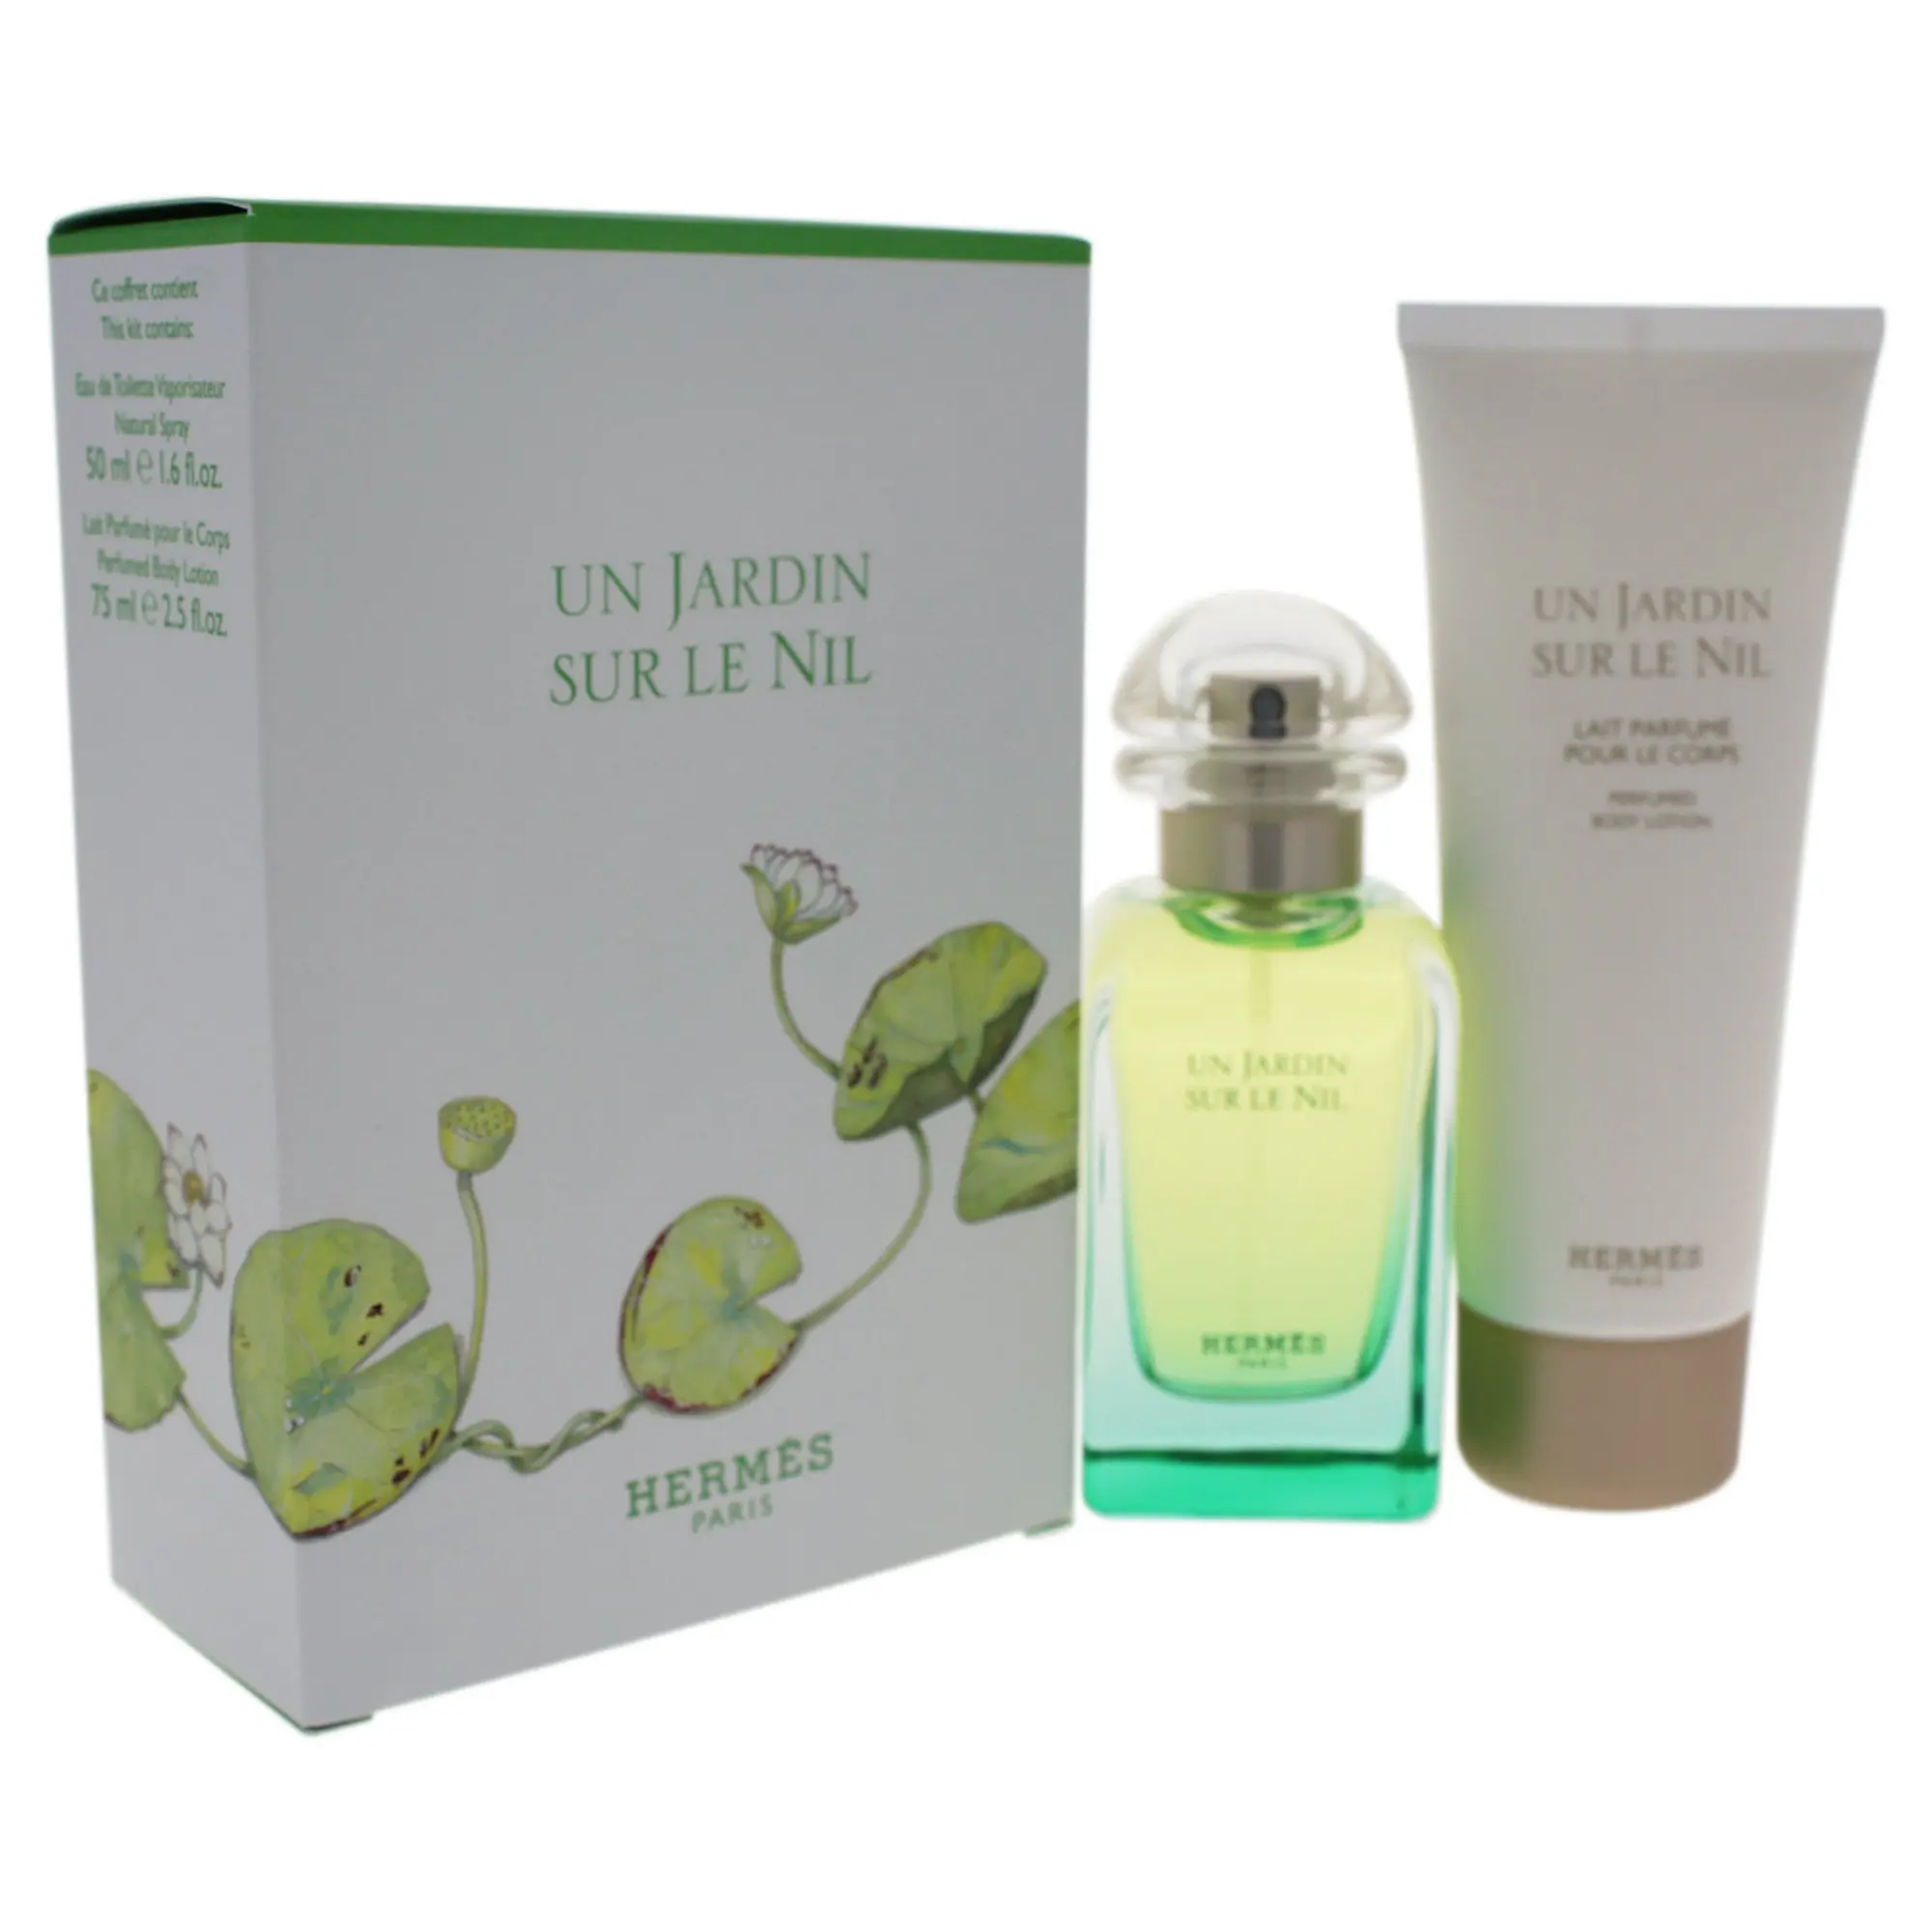 Buy Hermes - Un Jardin Sur Le Nil For Unisex 200ml EDT in Cheap Price on Alibaba.com